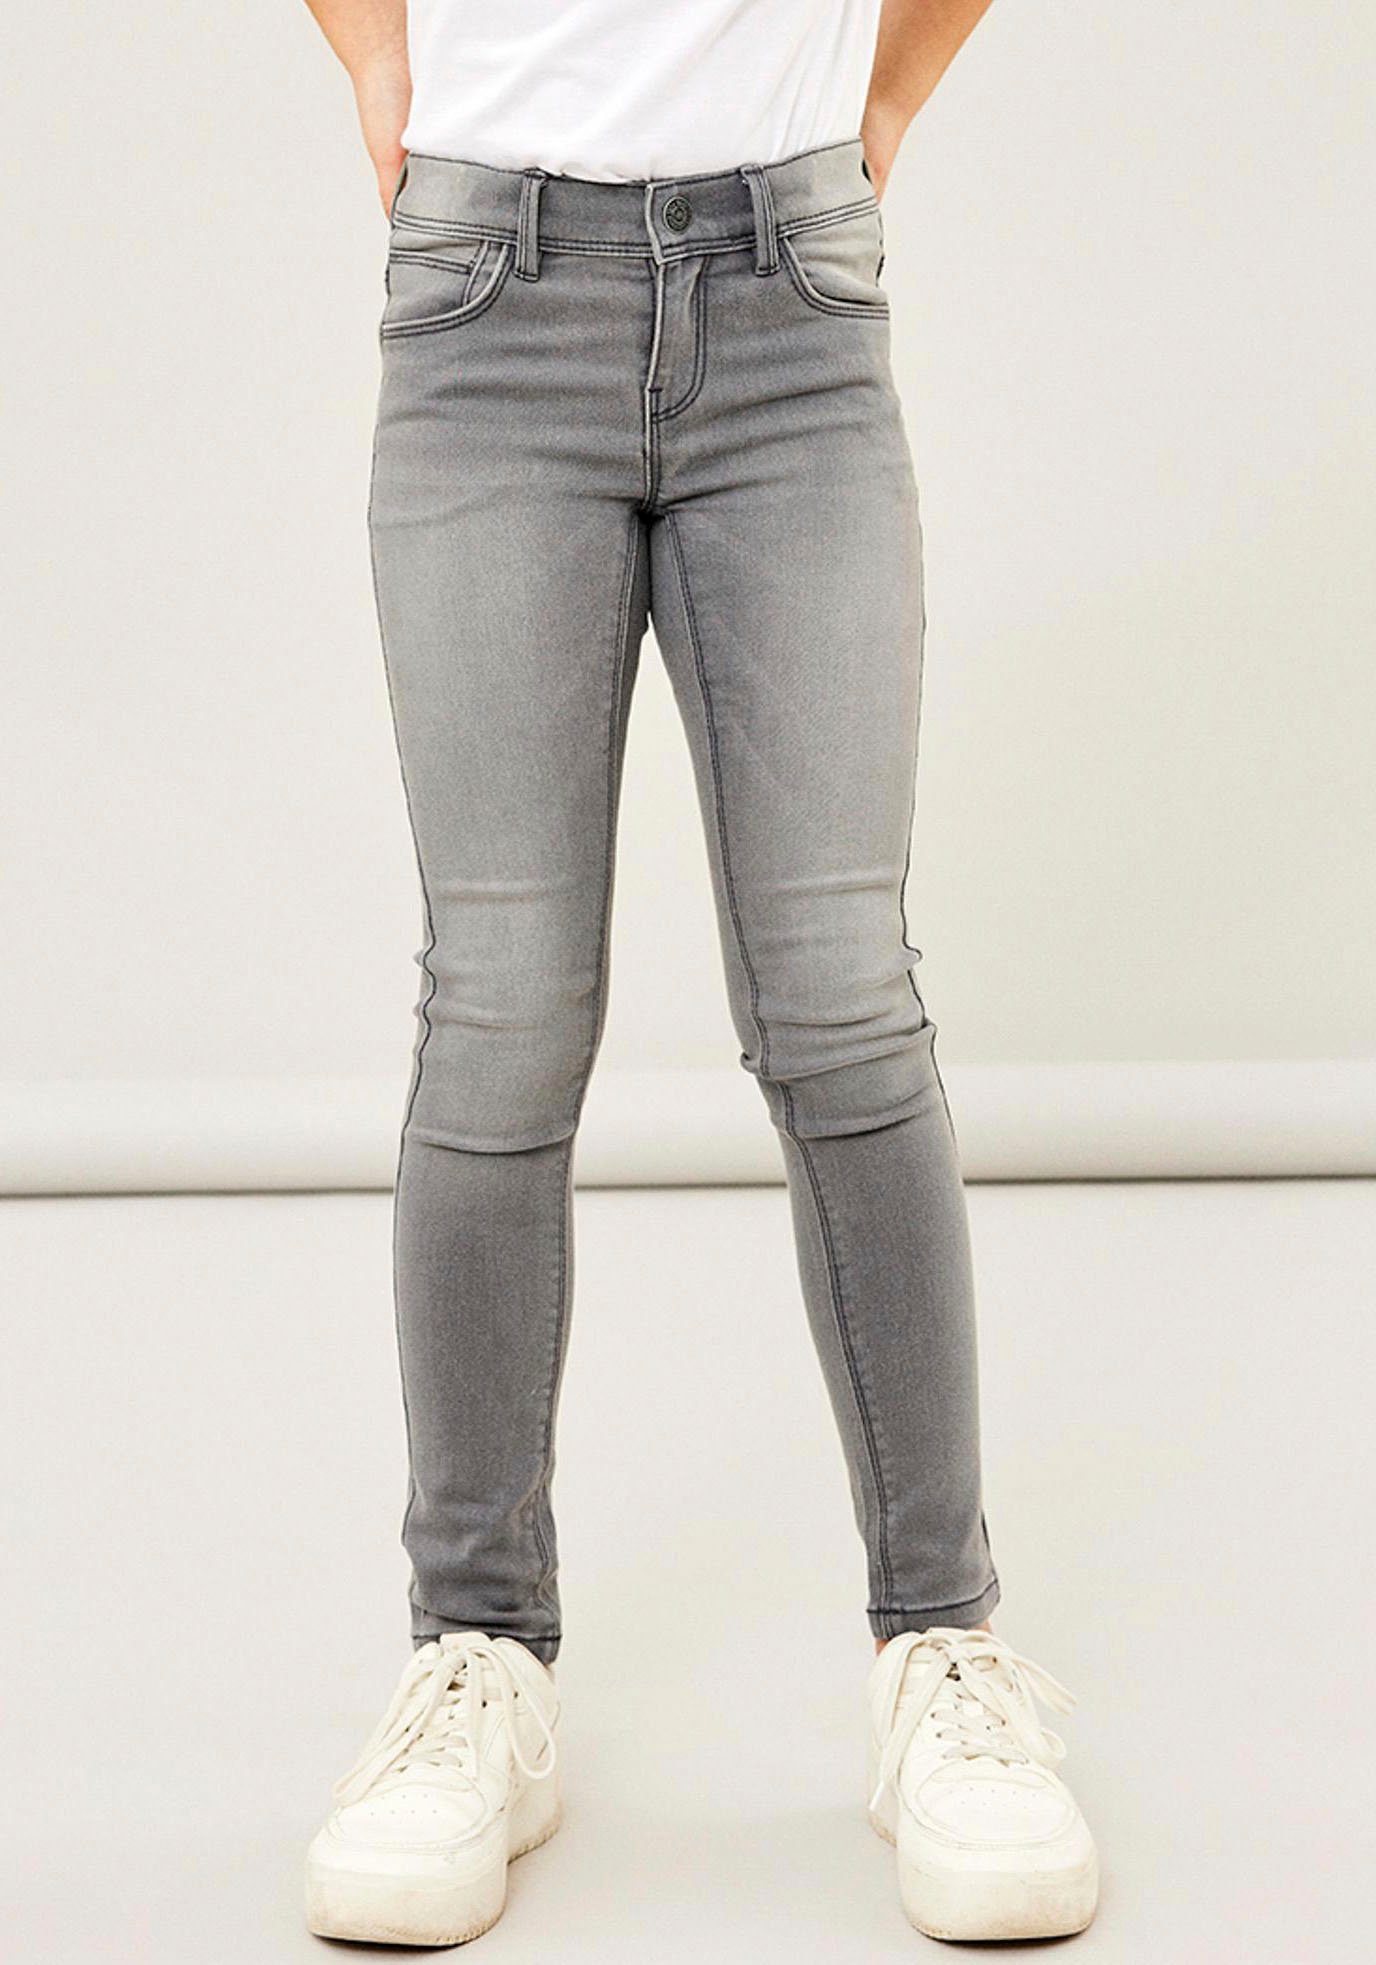 It grey DNMTAX Stretch-Jeans NKFPOLLY PANT Name light denim